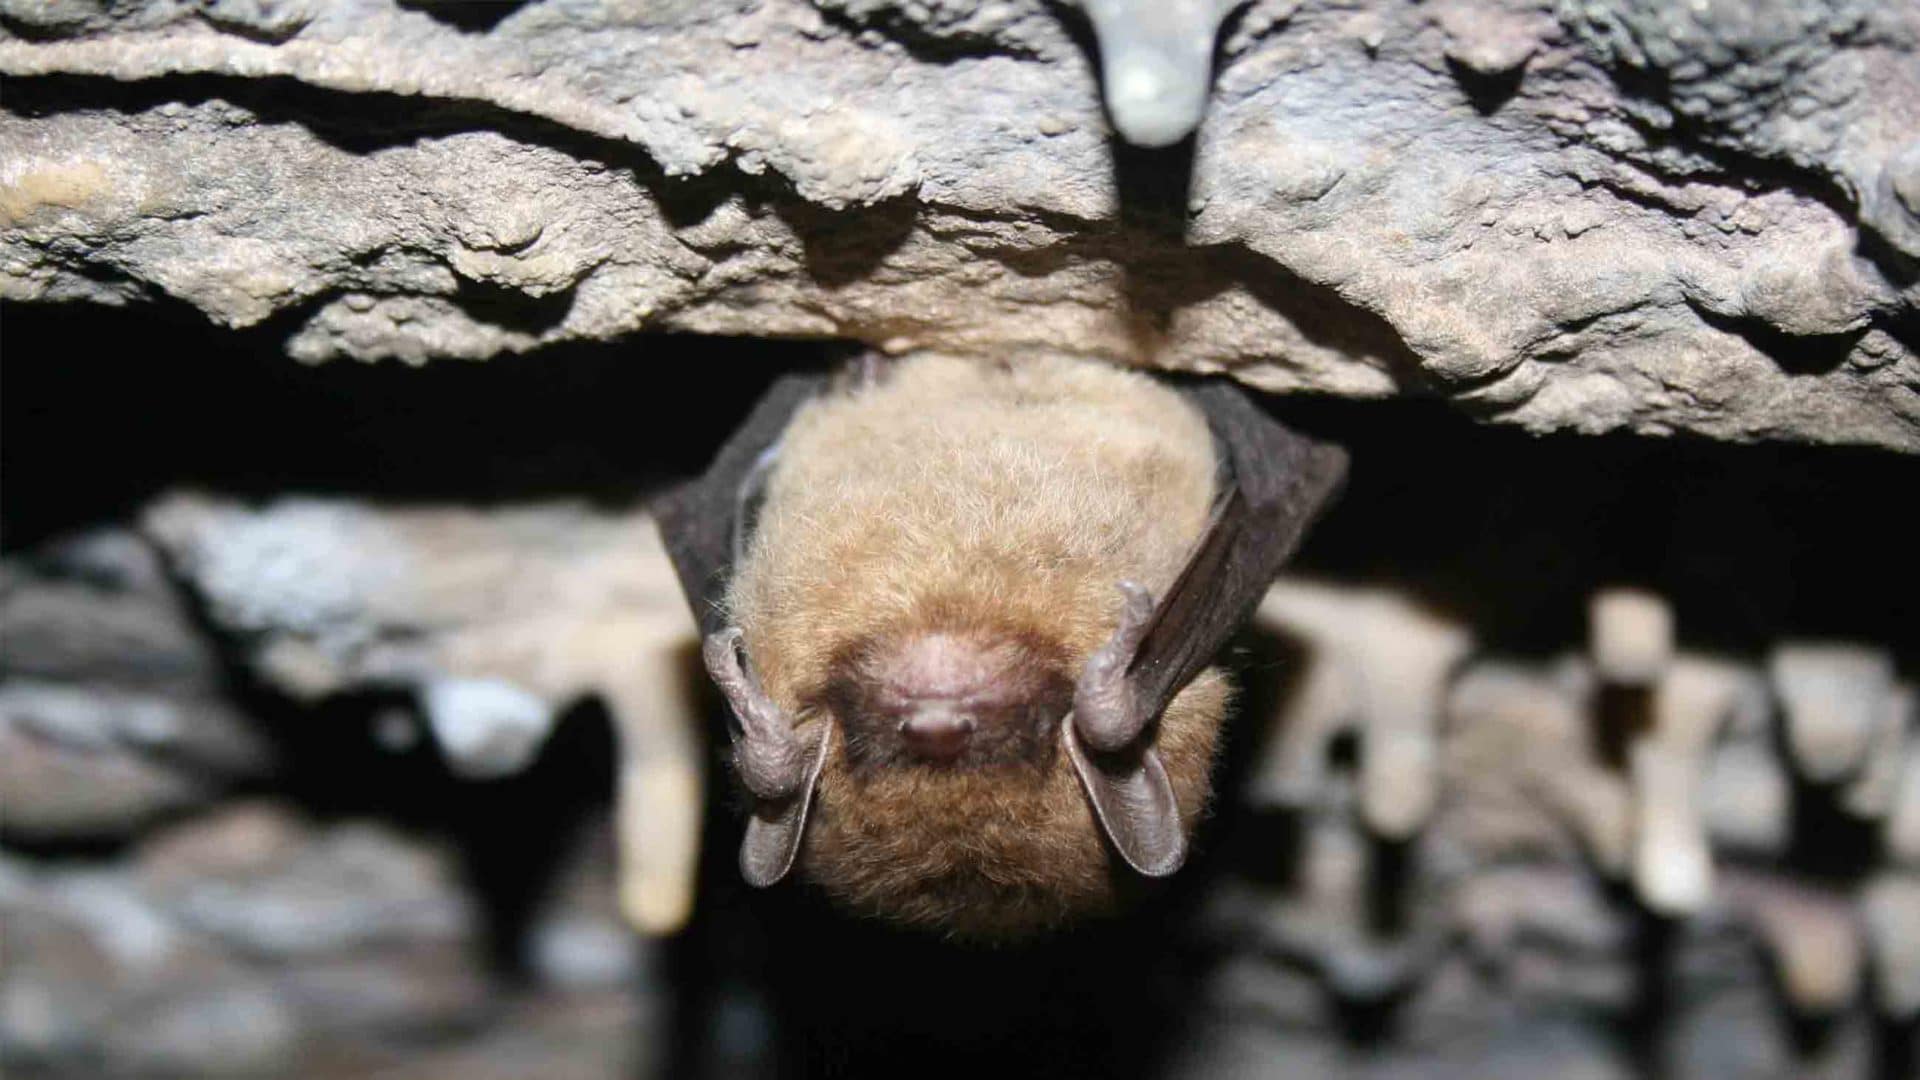 Little brown bats are particularly susceptible to white nose syndrome, but in lab experiments administration of the bacteria Pseudomonas fluorescens increased their survival to the lethal underlying fungus.